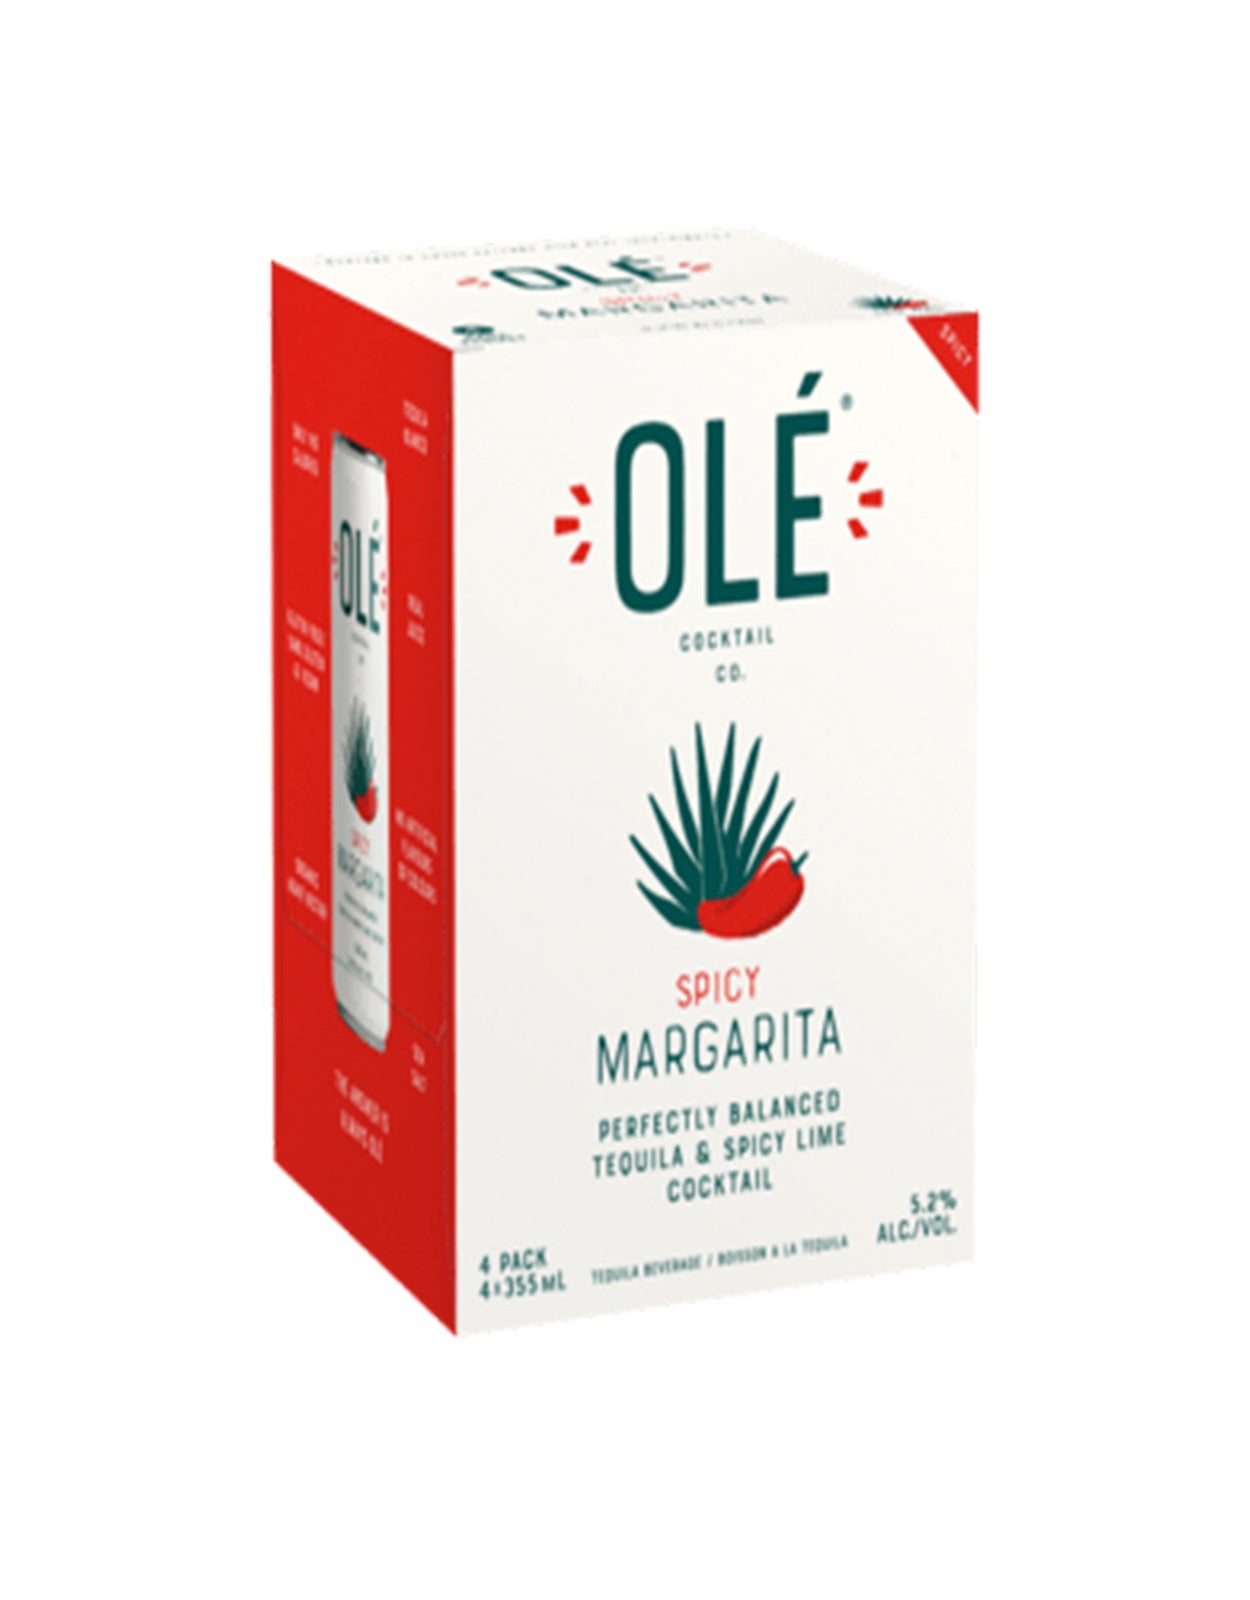 Ole Spicy Margarita - 24 Cans